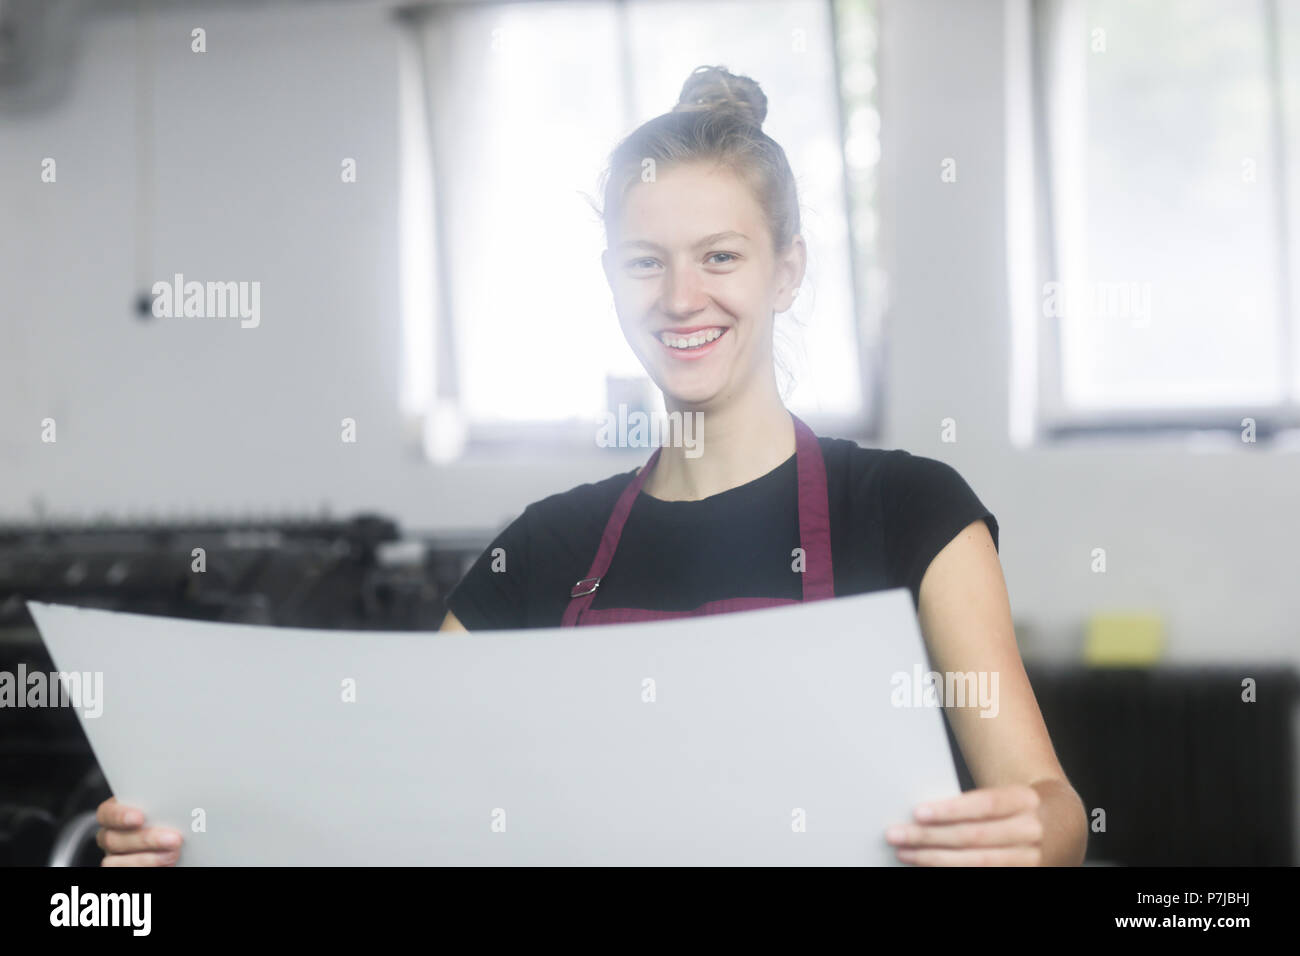 Smiling Woman standing by a printing press holding a piece of paper Stock Photo